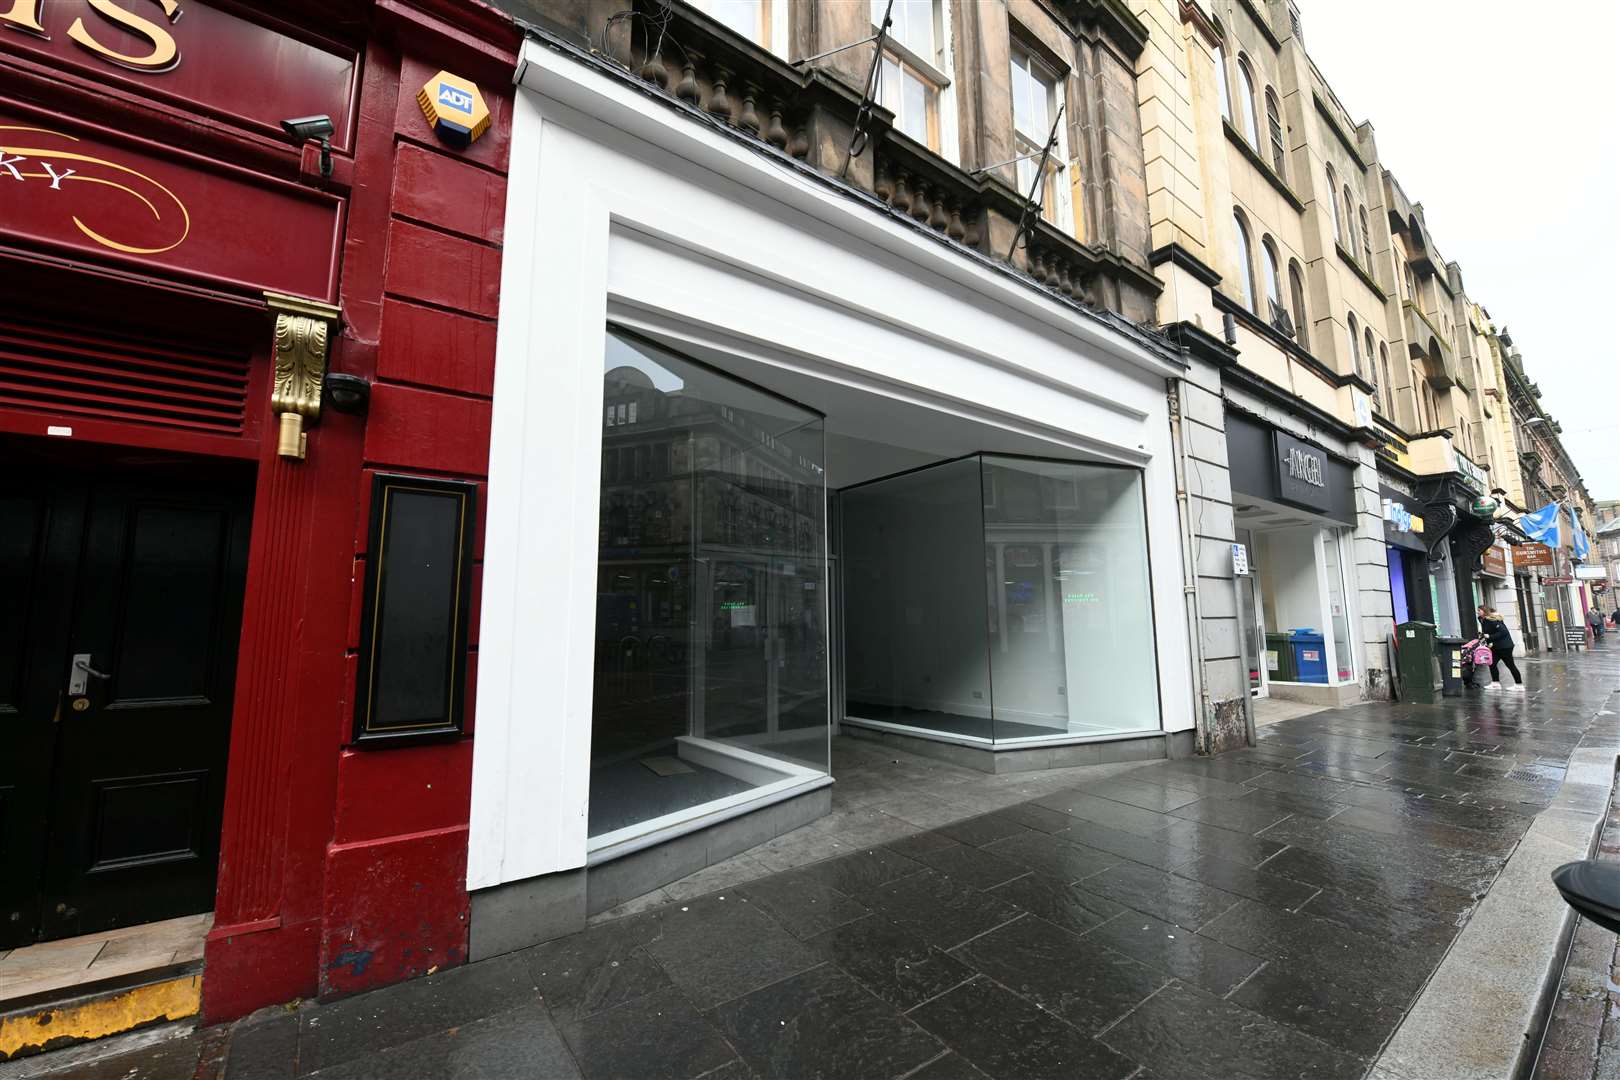 New location of Shelter Scotland in Union Street.